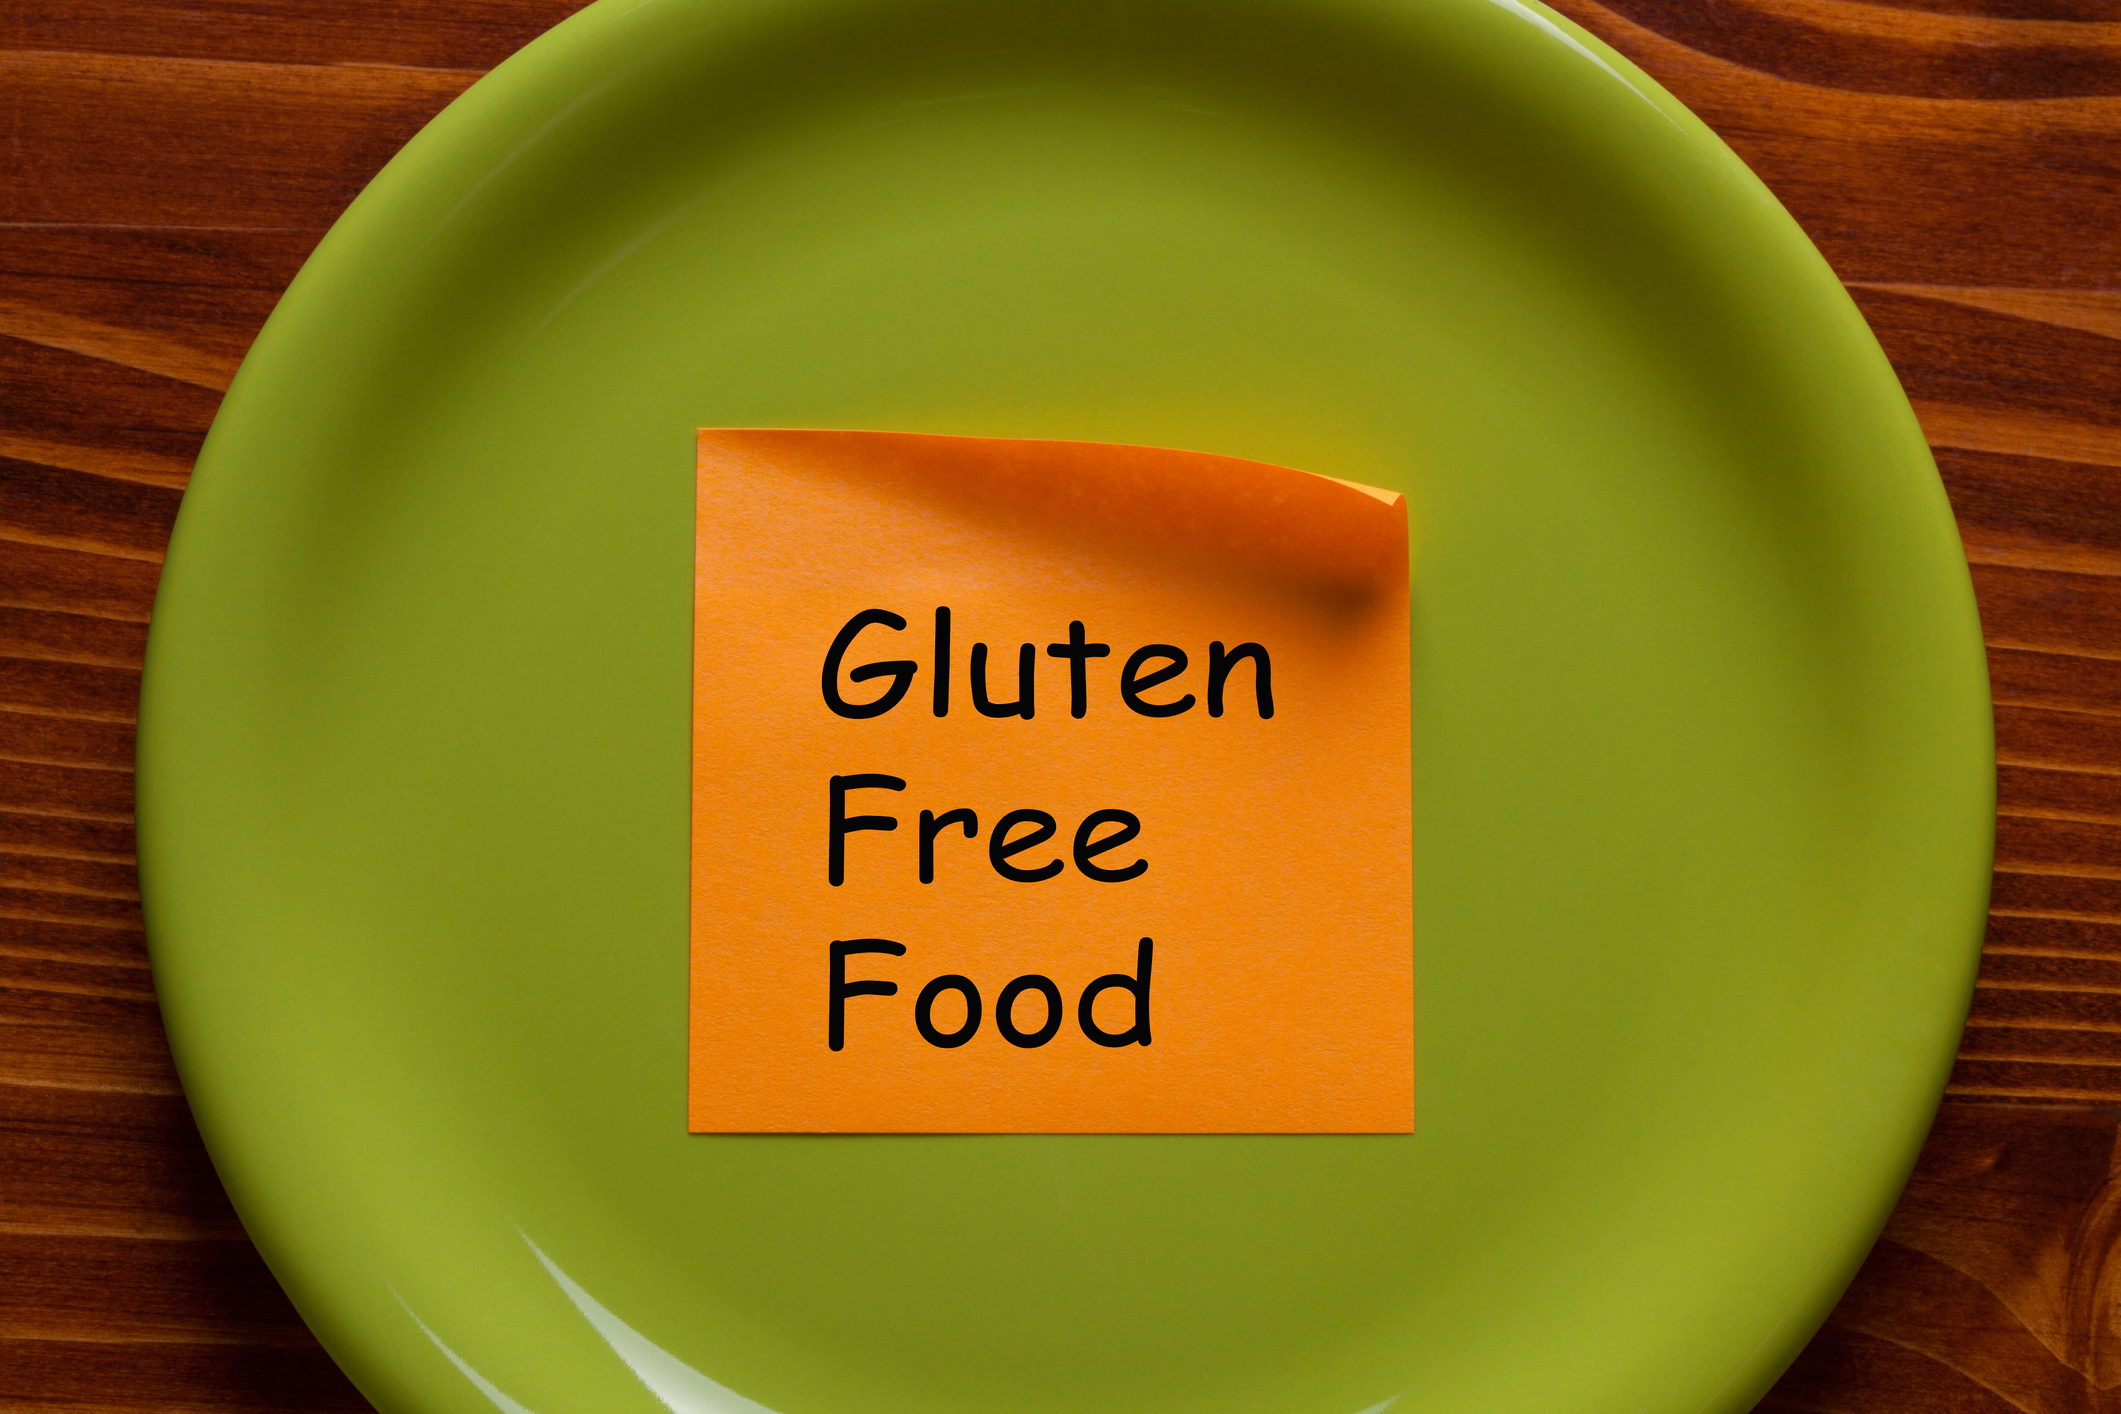 Gluten-free done wrong may be poisoning you